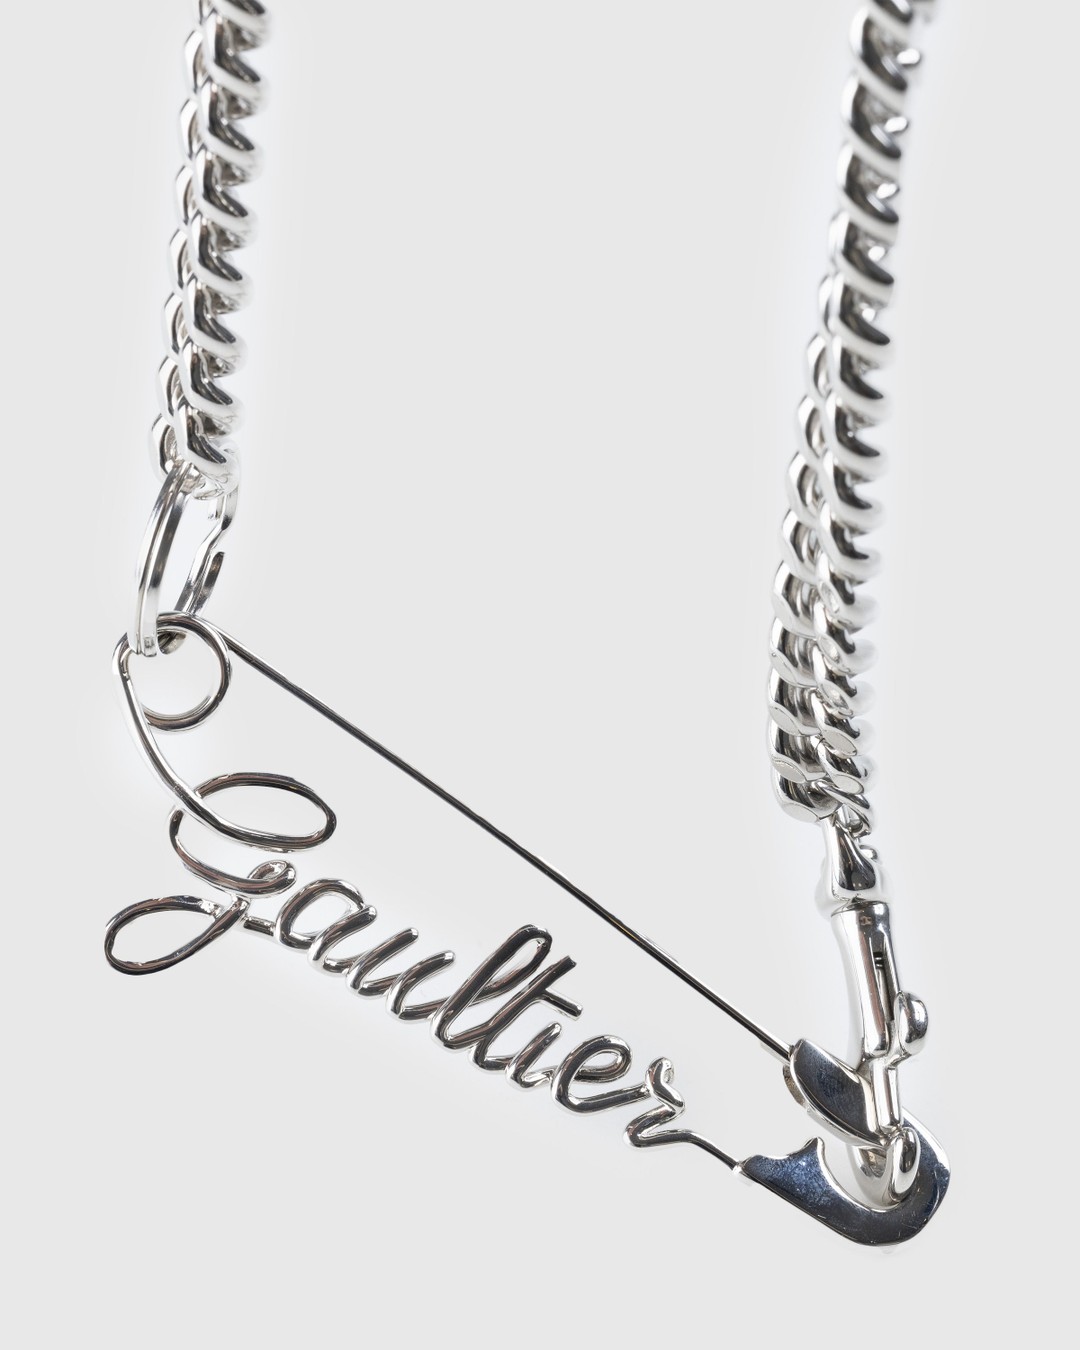 Jean Paul Gaultier – Safety Pin Gaultier Necklace Silver - Jewelry - Silver - Image 2